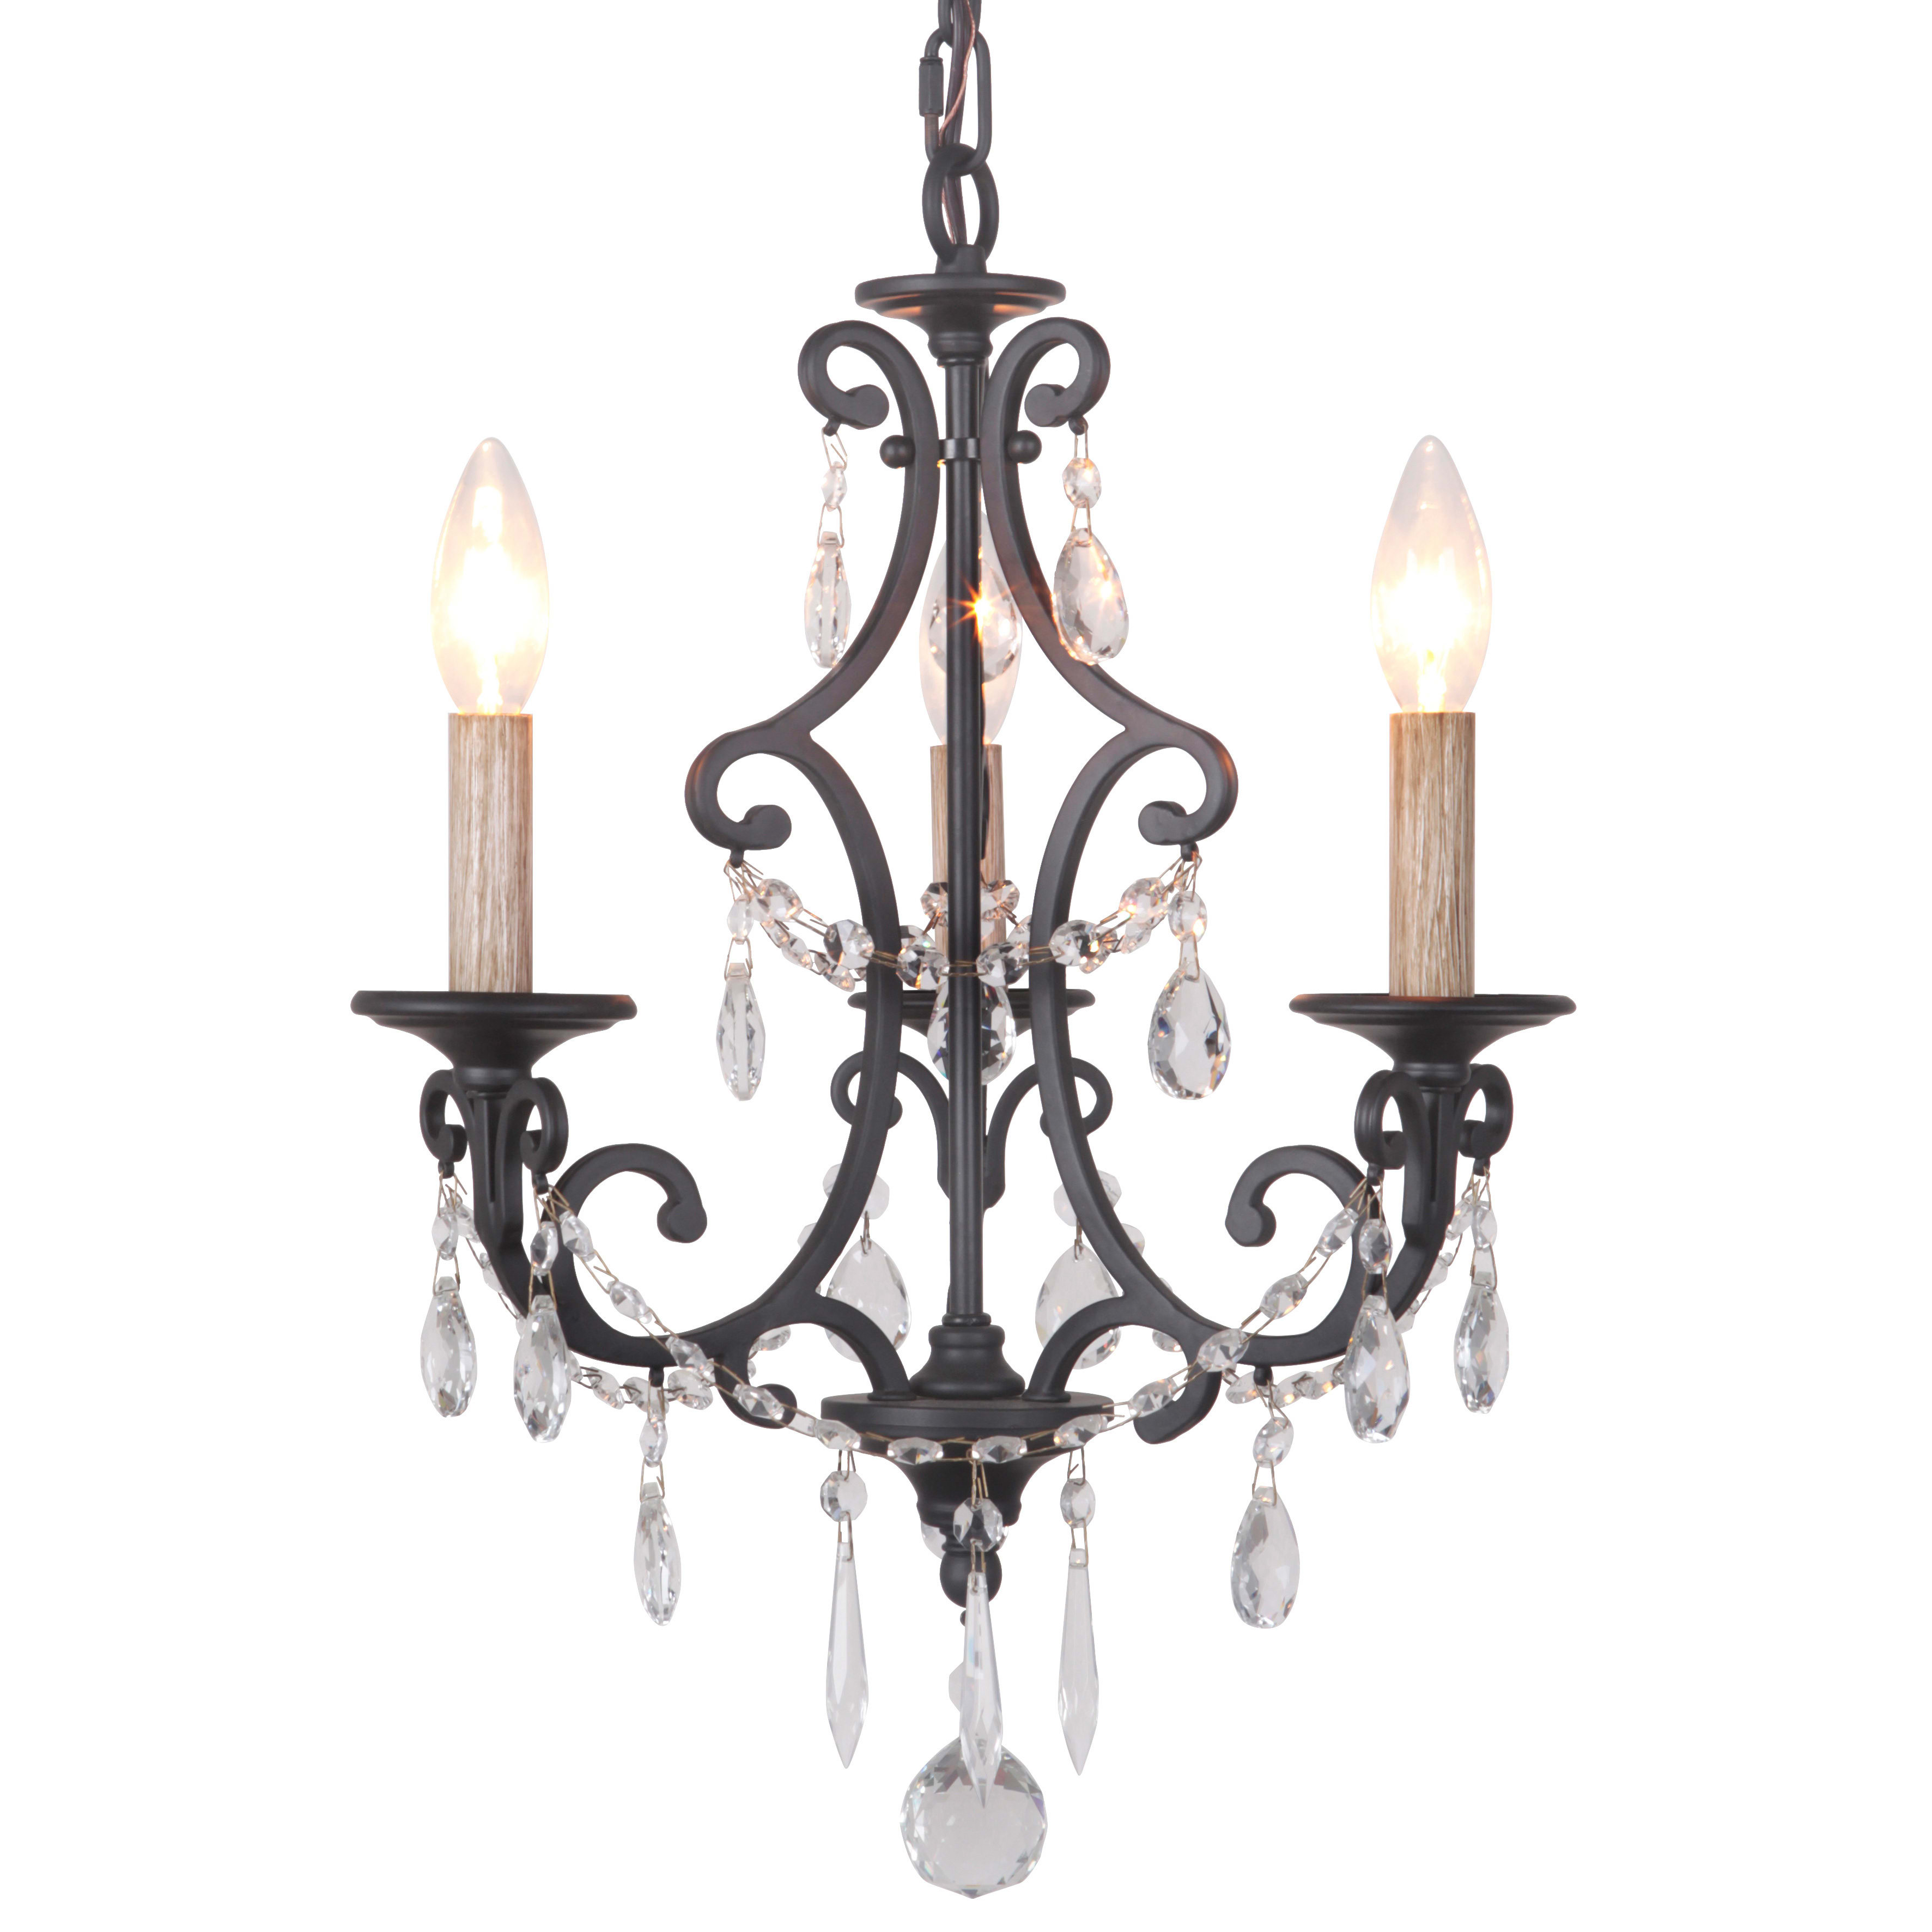 Craftmade 38923-MBK Matte Black Bentley Light Candle Style Chandelier  14 Inches Wide